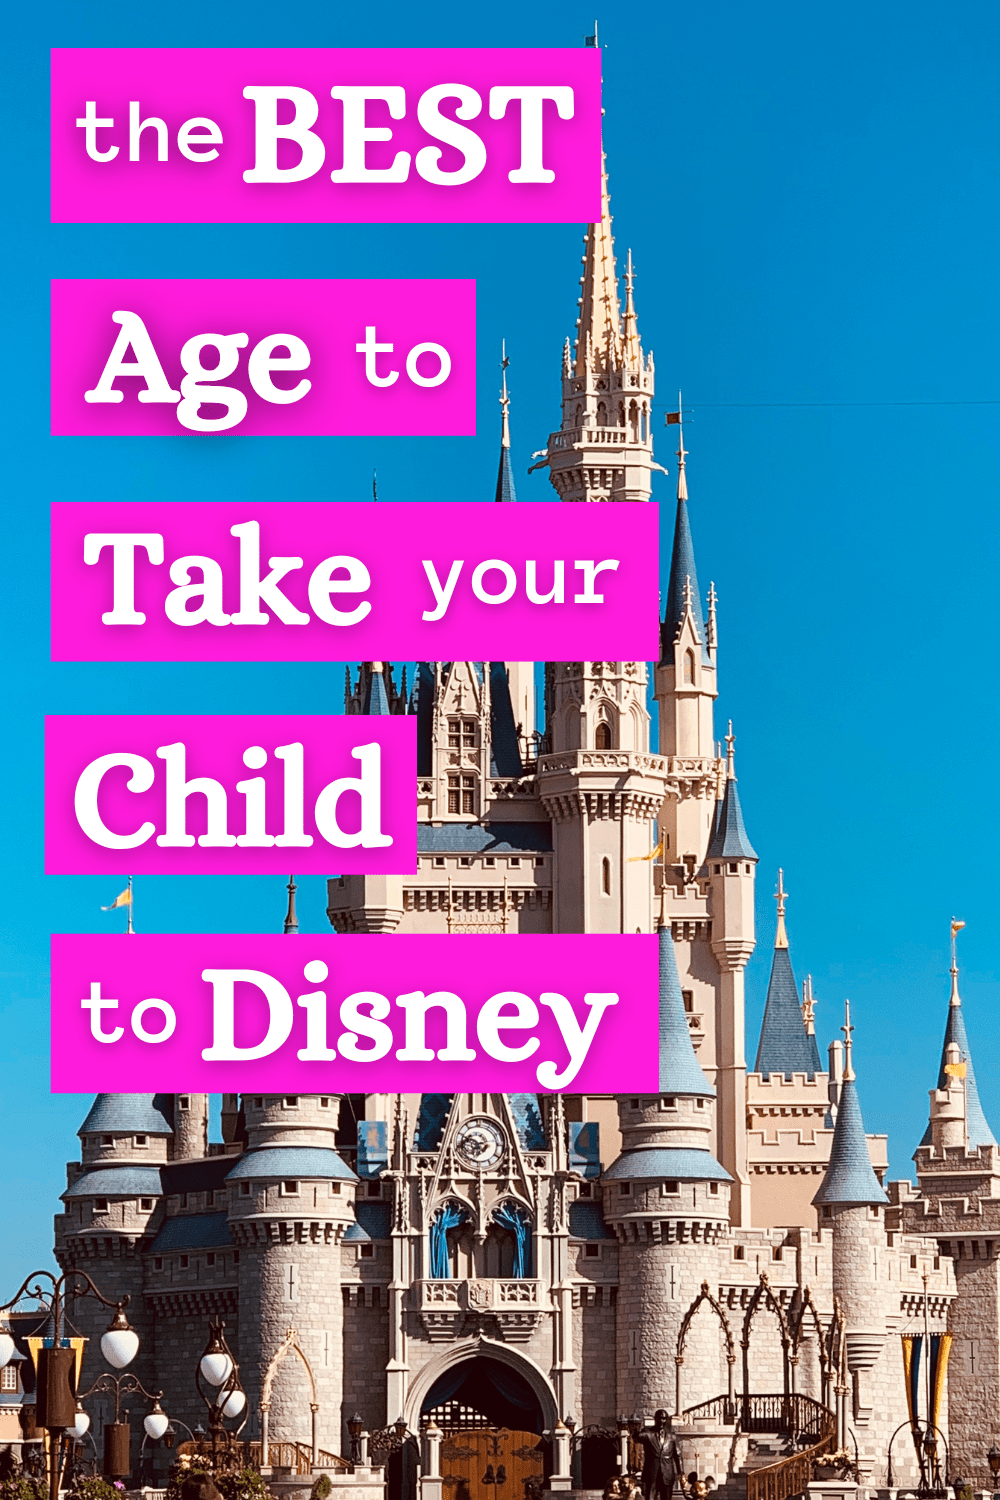 https://inspiringmagicalmemories.com/wp-content/uploads/2023/05/The-Best-Age-to-Take-Your-Child-to-Disney.png